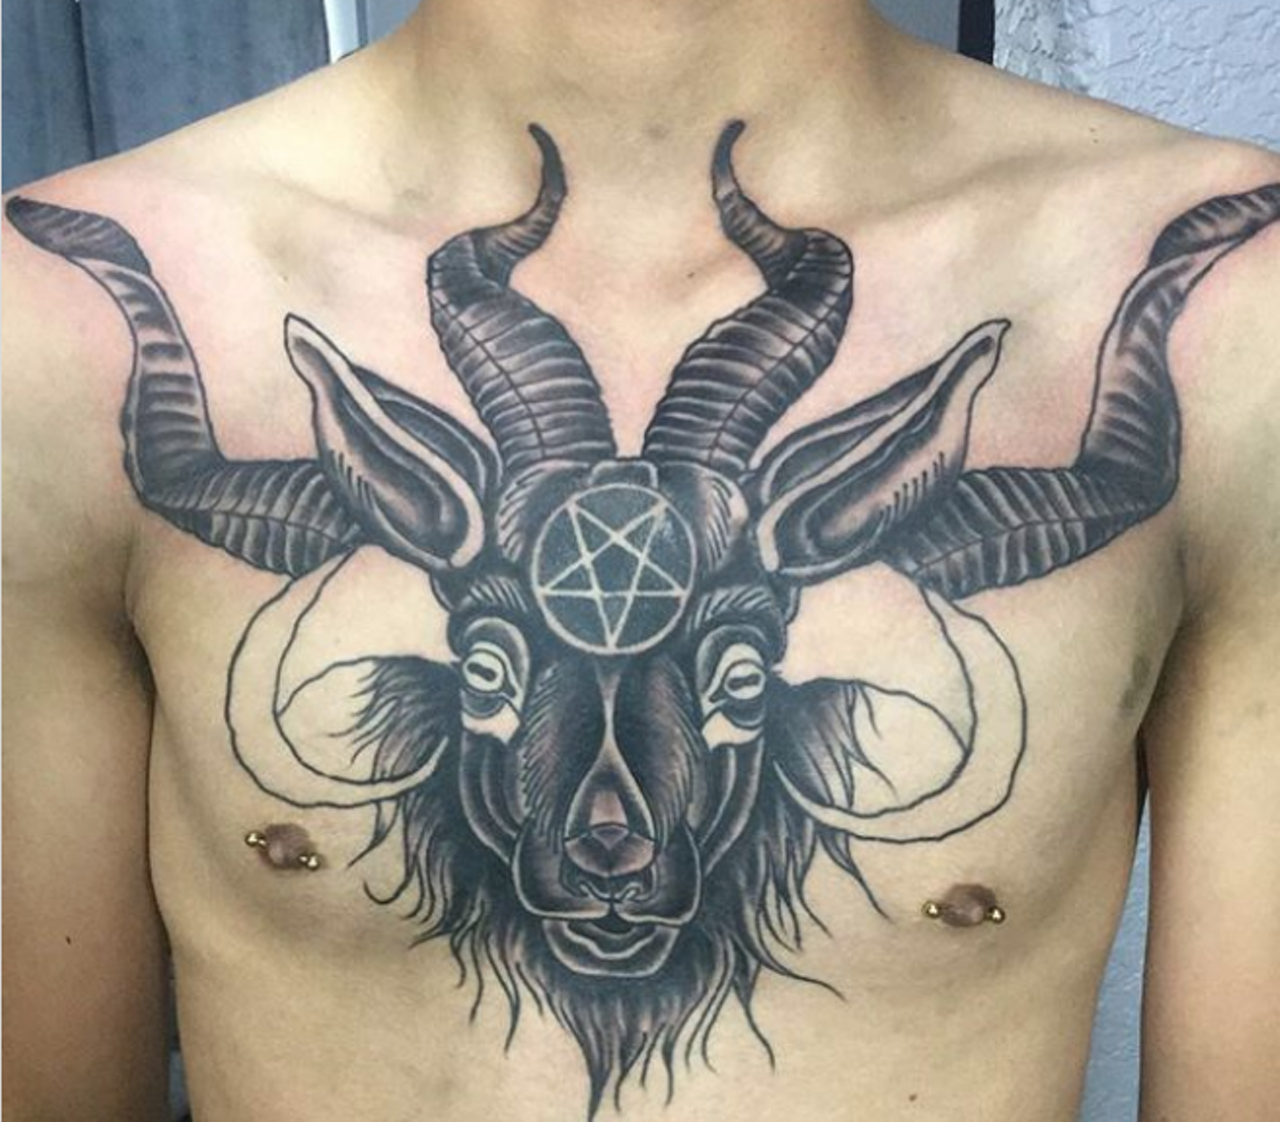 Check out these badass tattoos If you are looking for tattoo ideas -  BreakBrunch